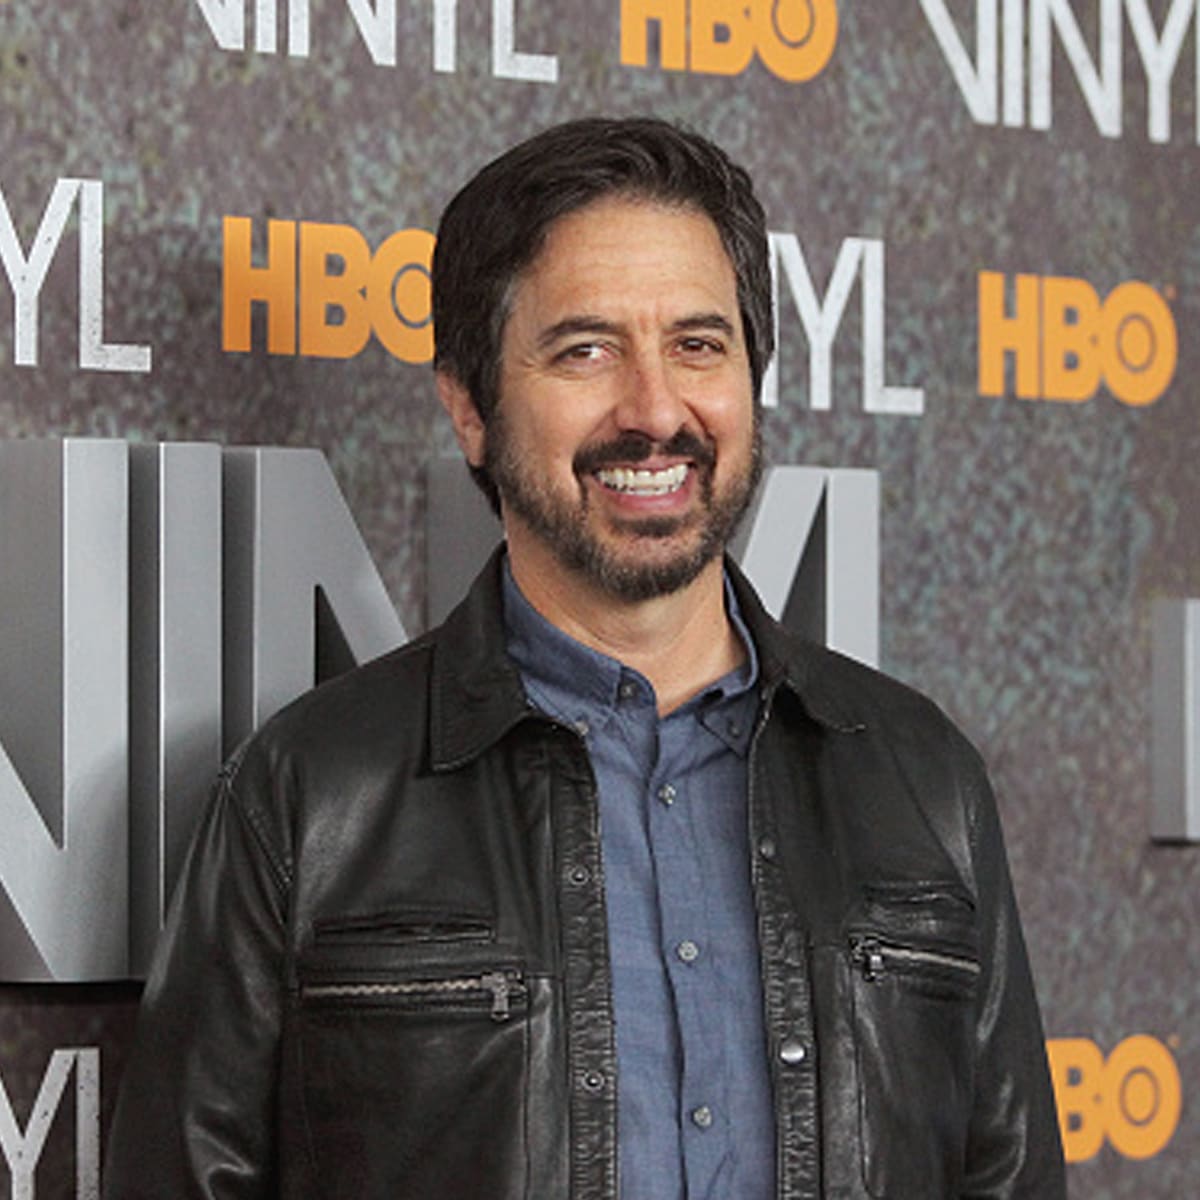 Actor Ray Romano attends the "Vinyl" New York premiere